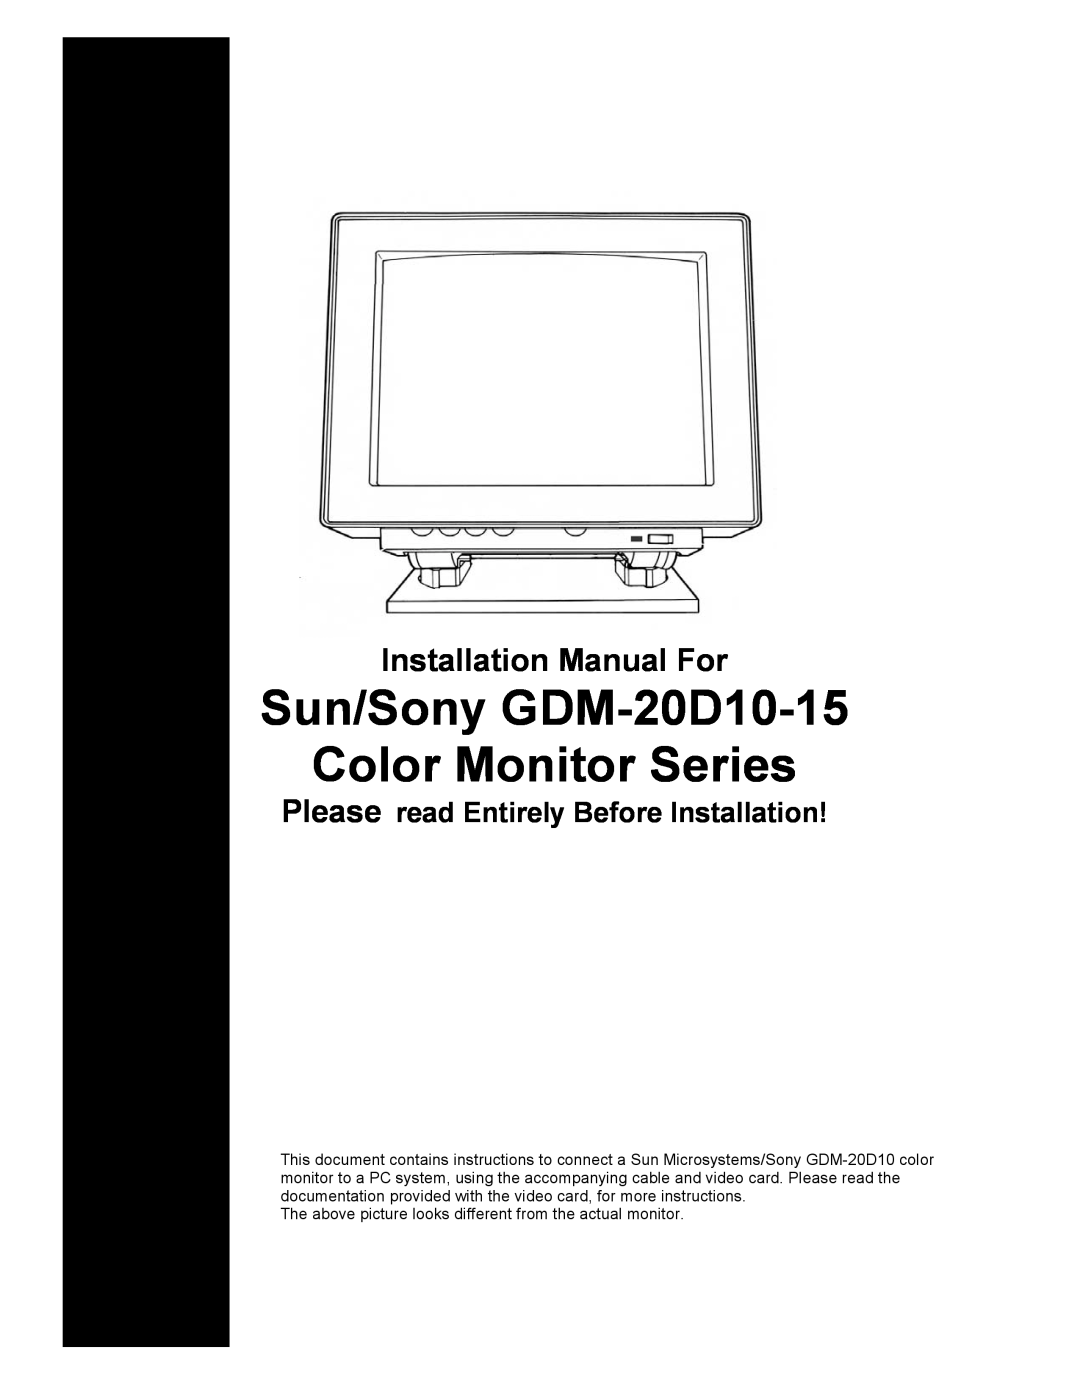 Sony installation manual Please read Entirely Before Installation, Sun/Sony GDM-20D10-15 Color Monitor Series 